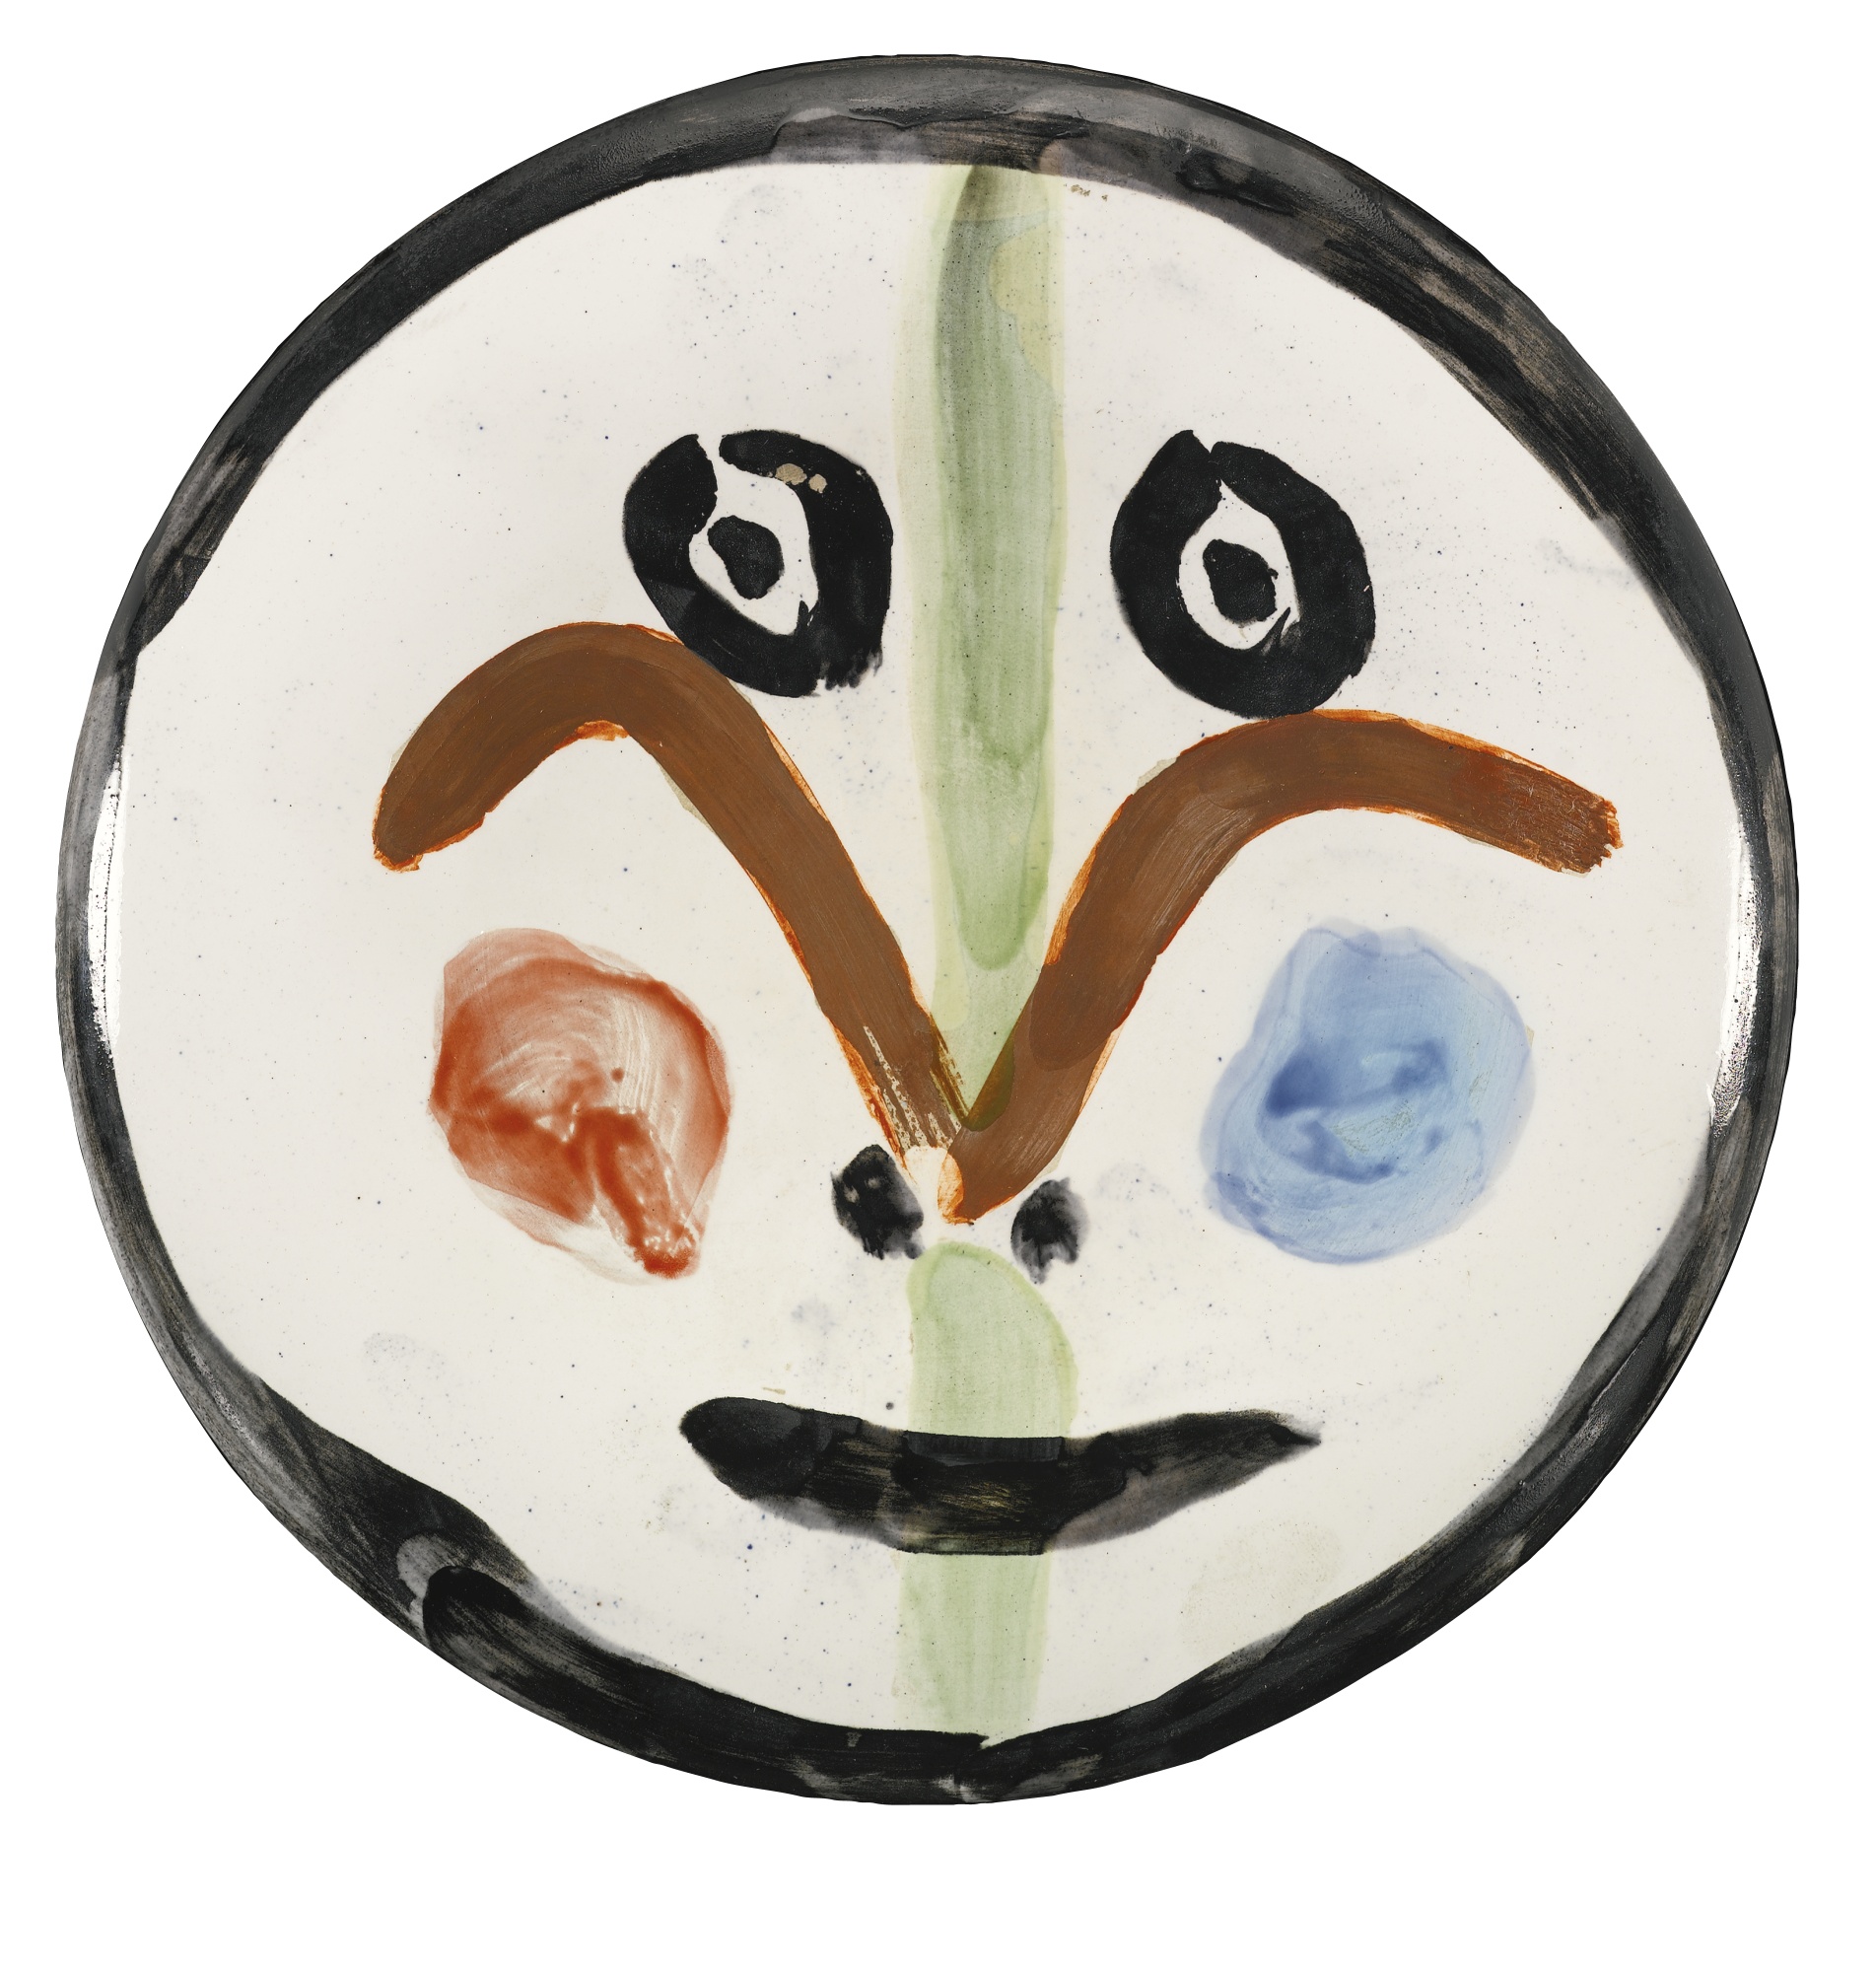     Important Ceramics by Pablo Picasso from a Private Collection including Modern and Contemporary Prints   19 